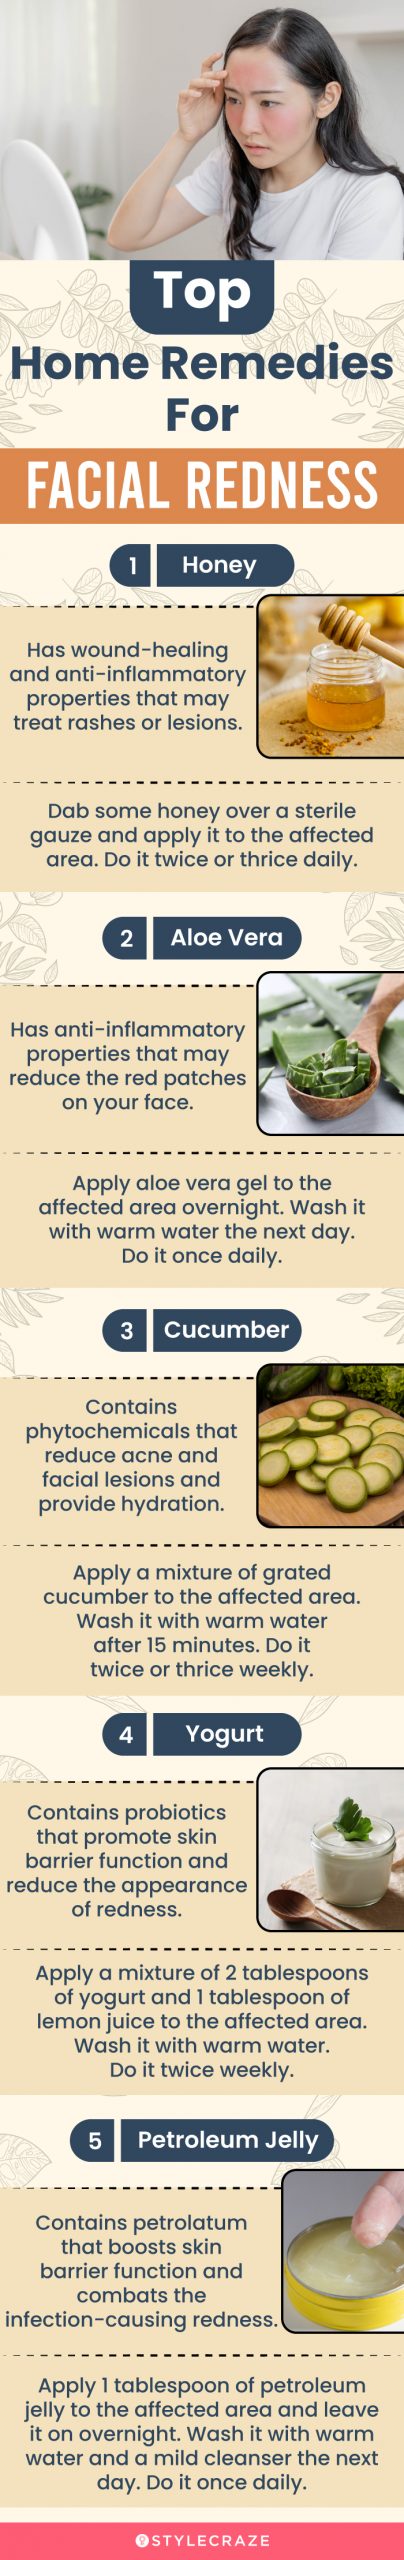 top home remedies for facial redness (infographic)